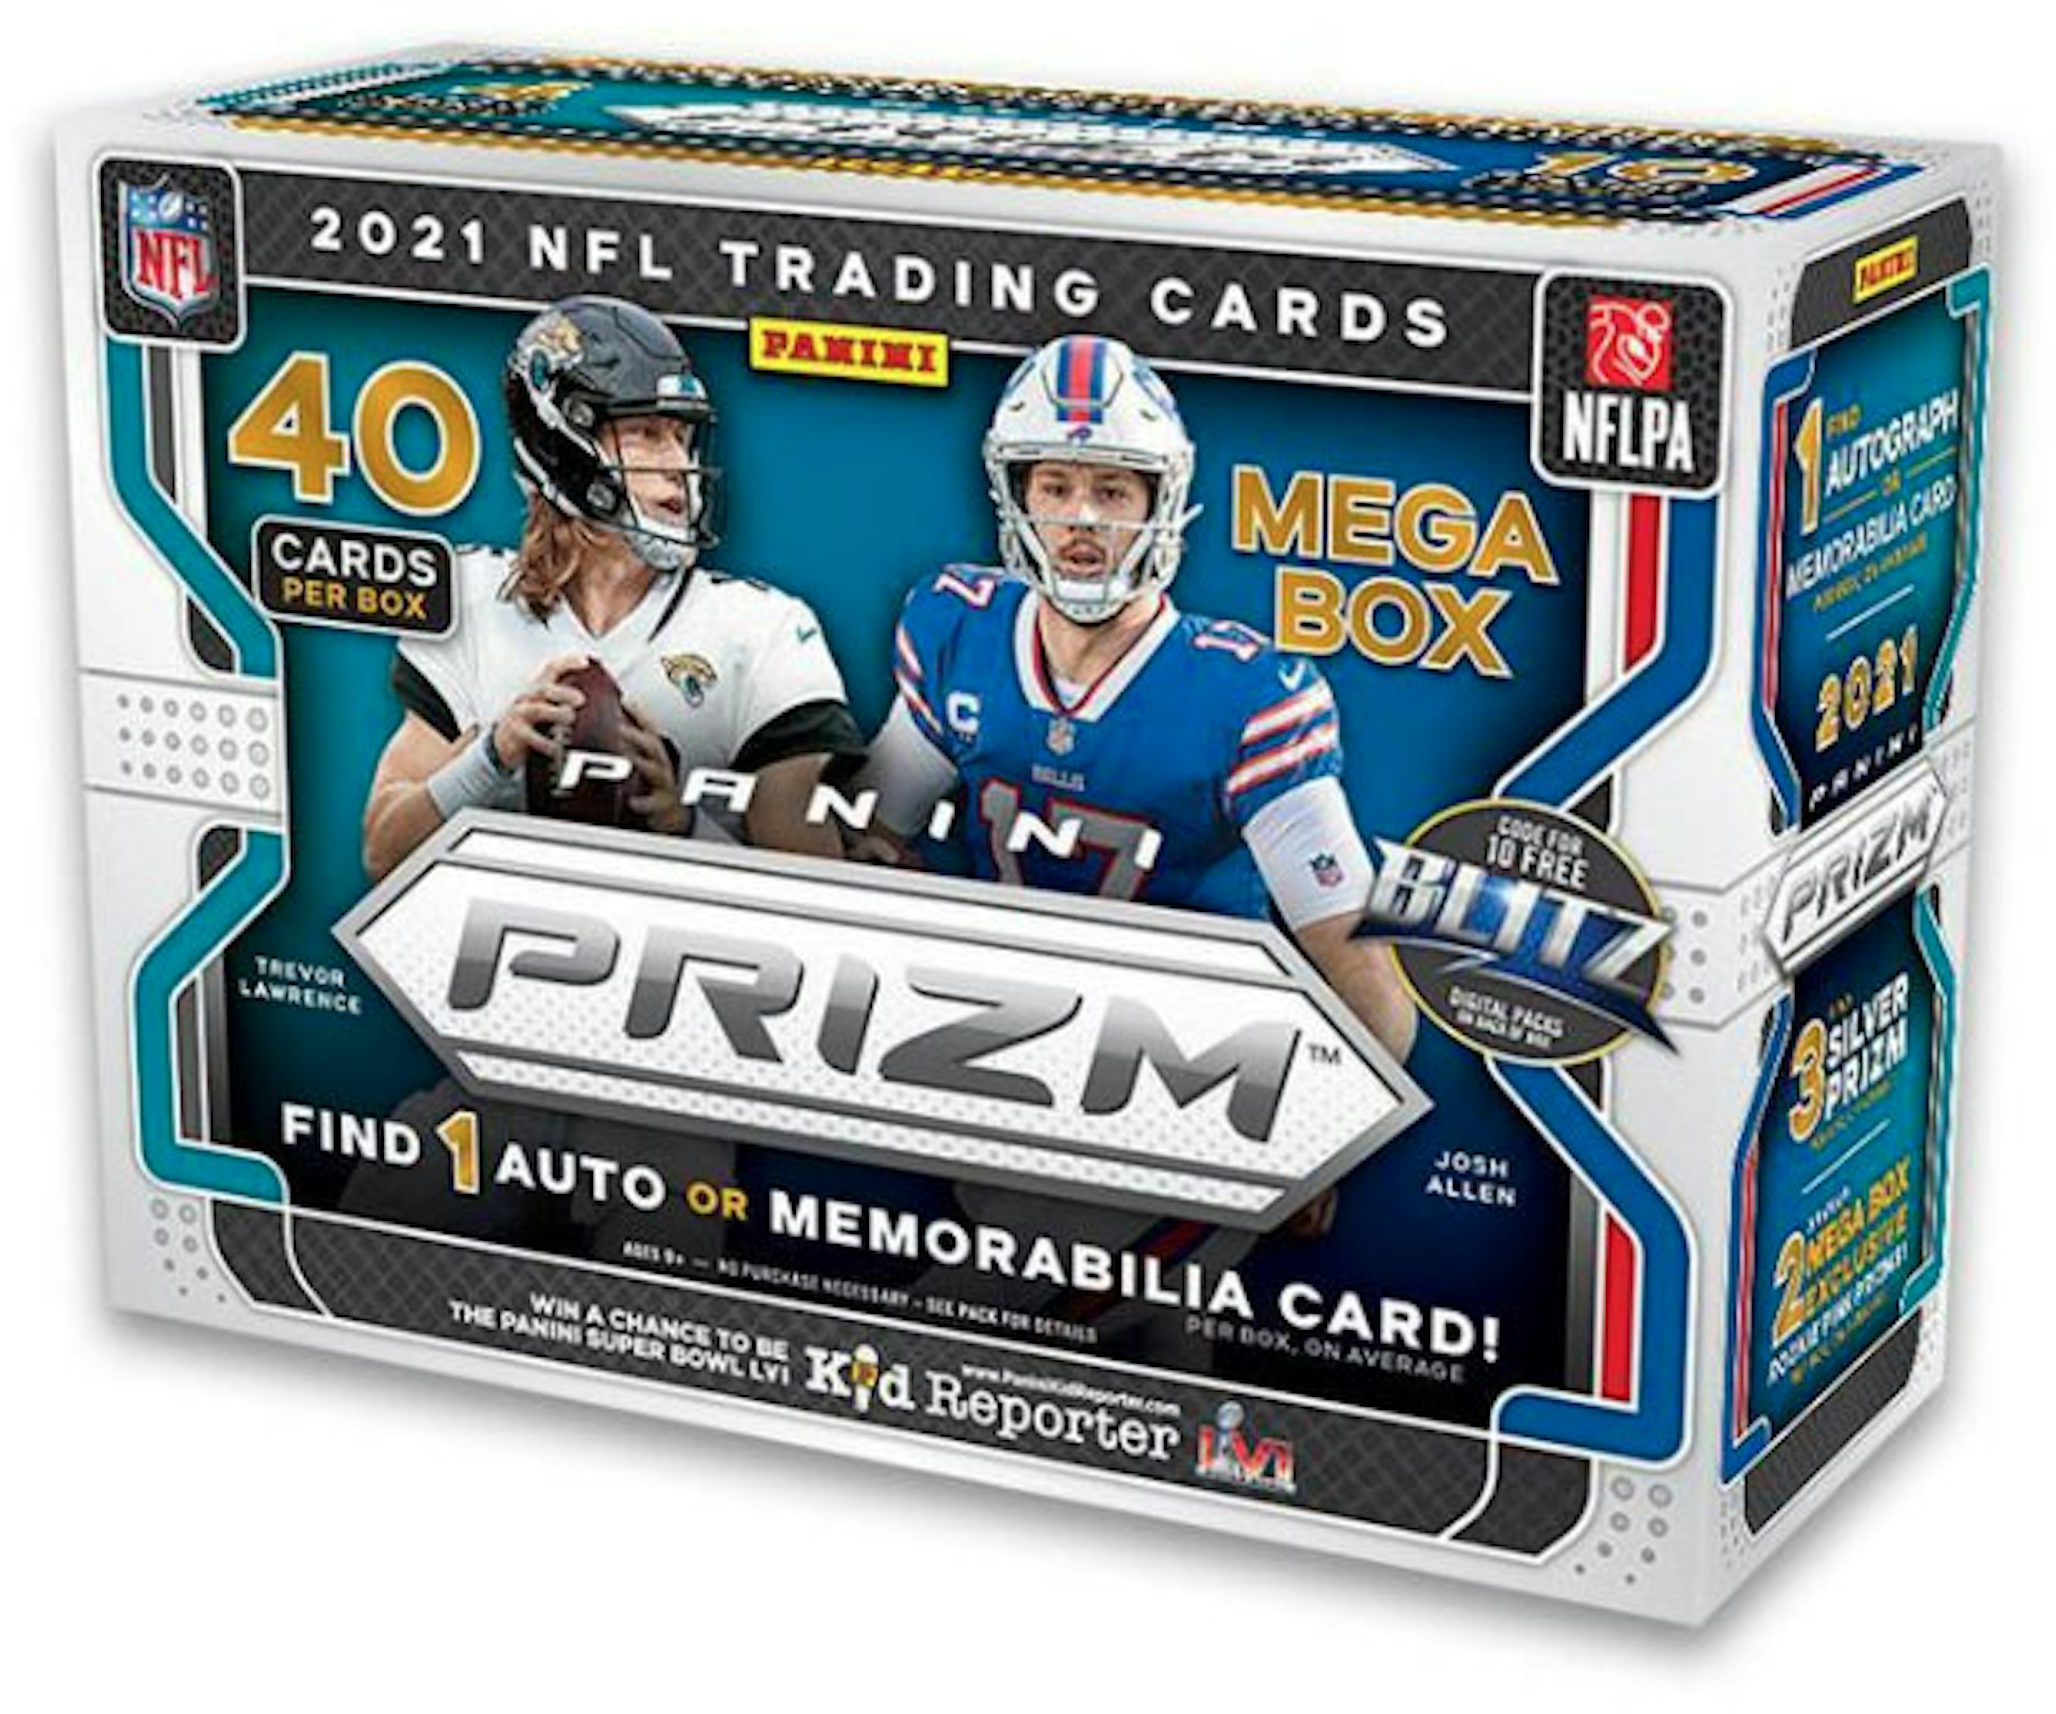 2023 Panini NFL Sticker & Card Collection Box Break and Album Review 